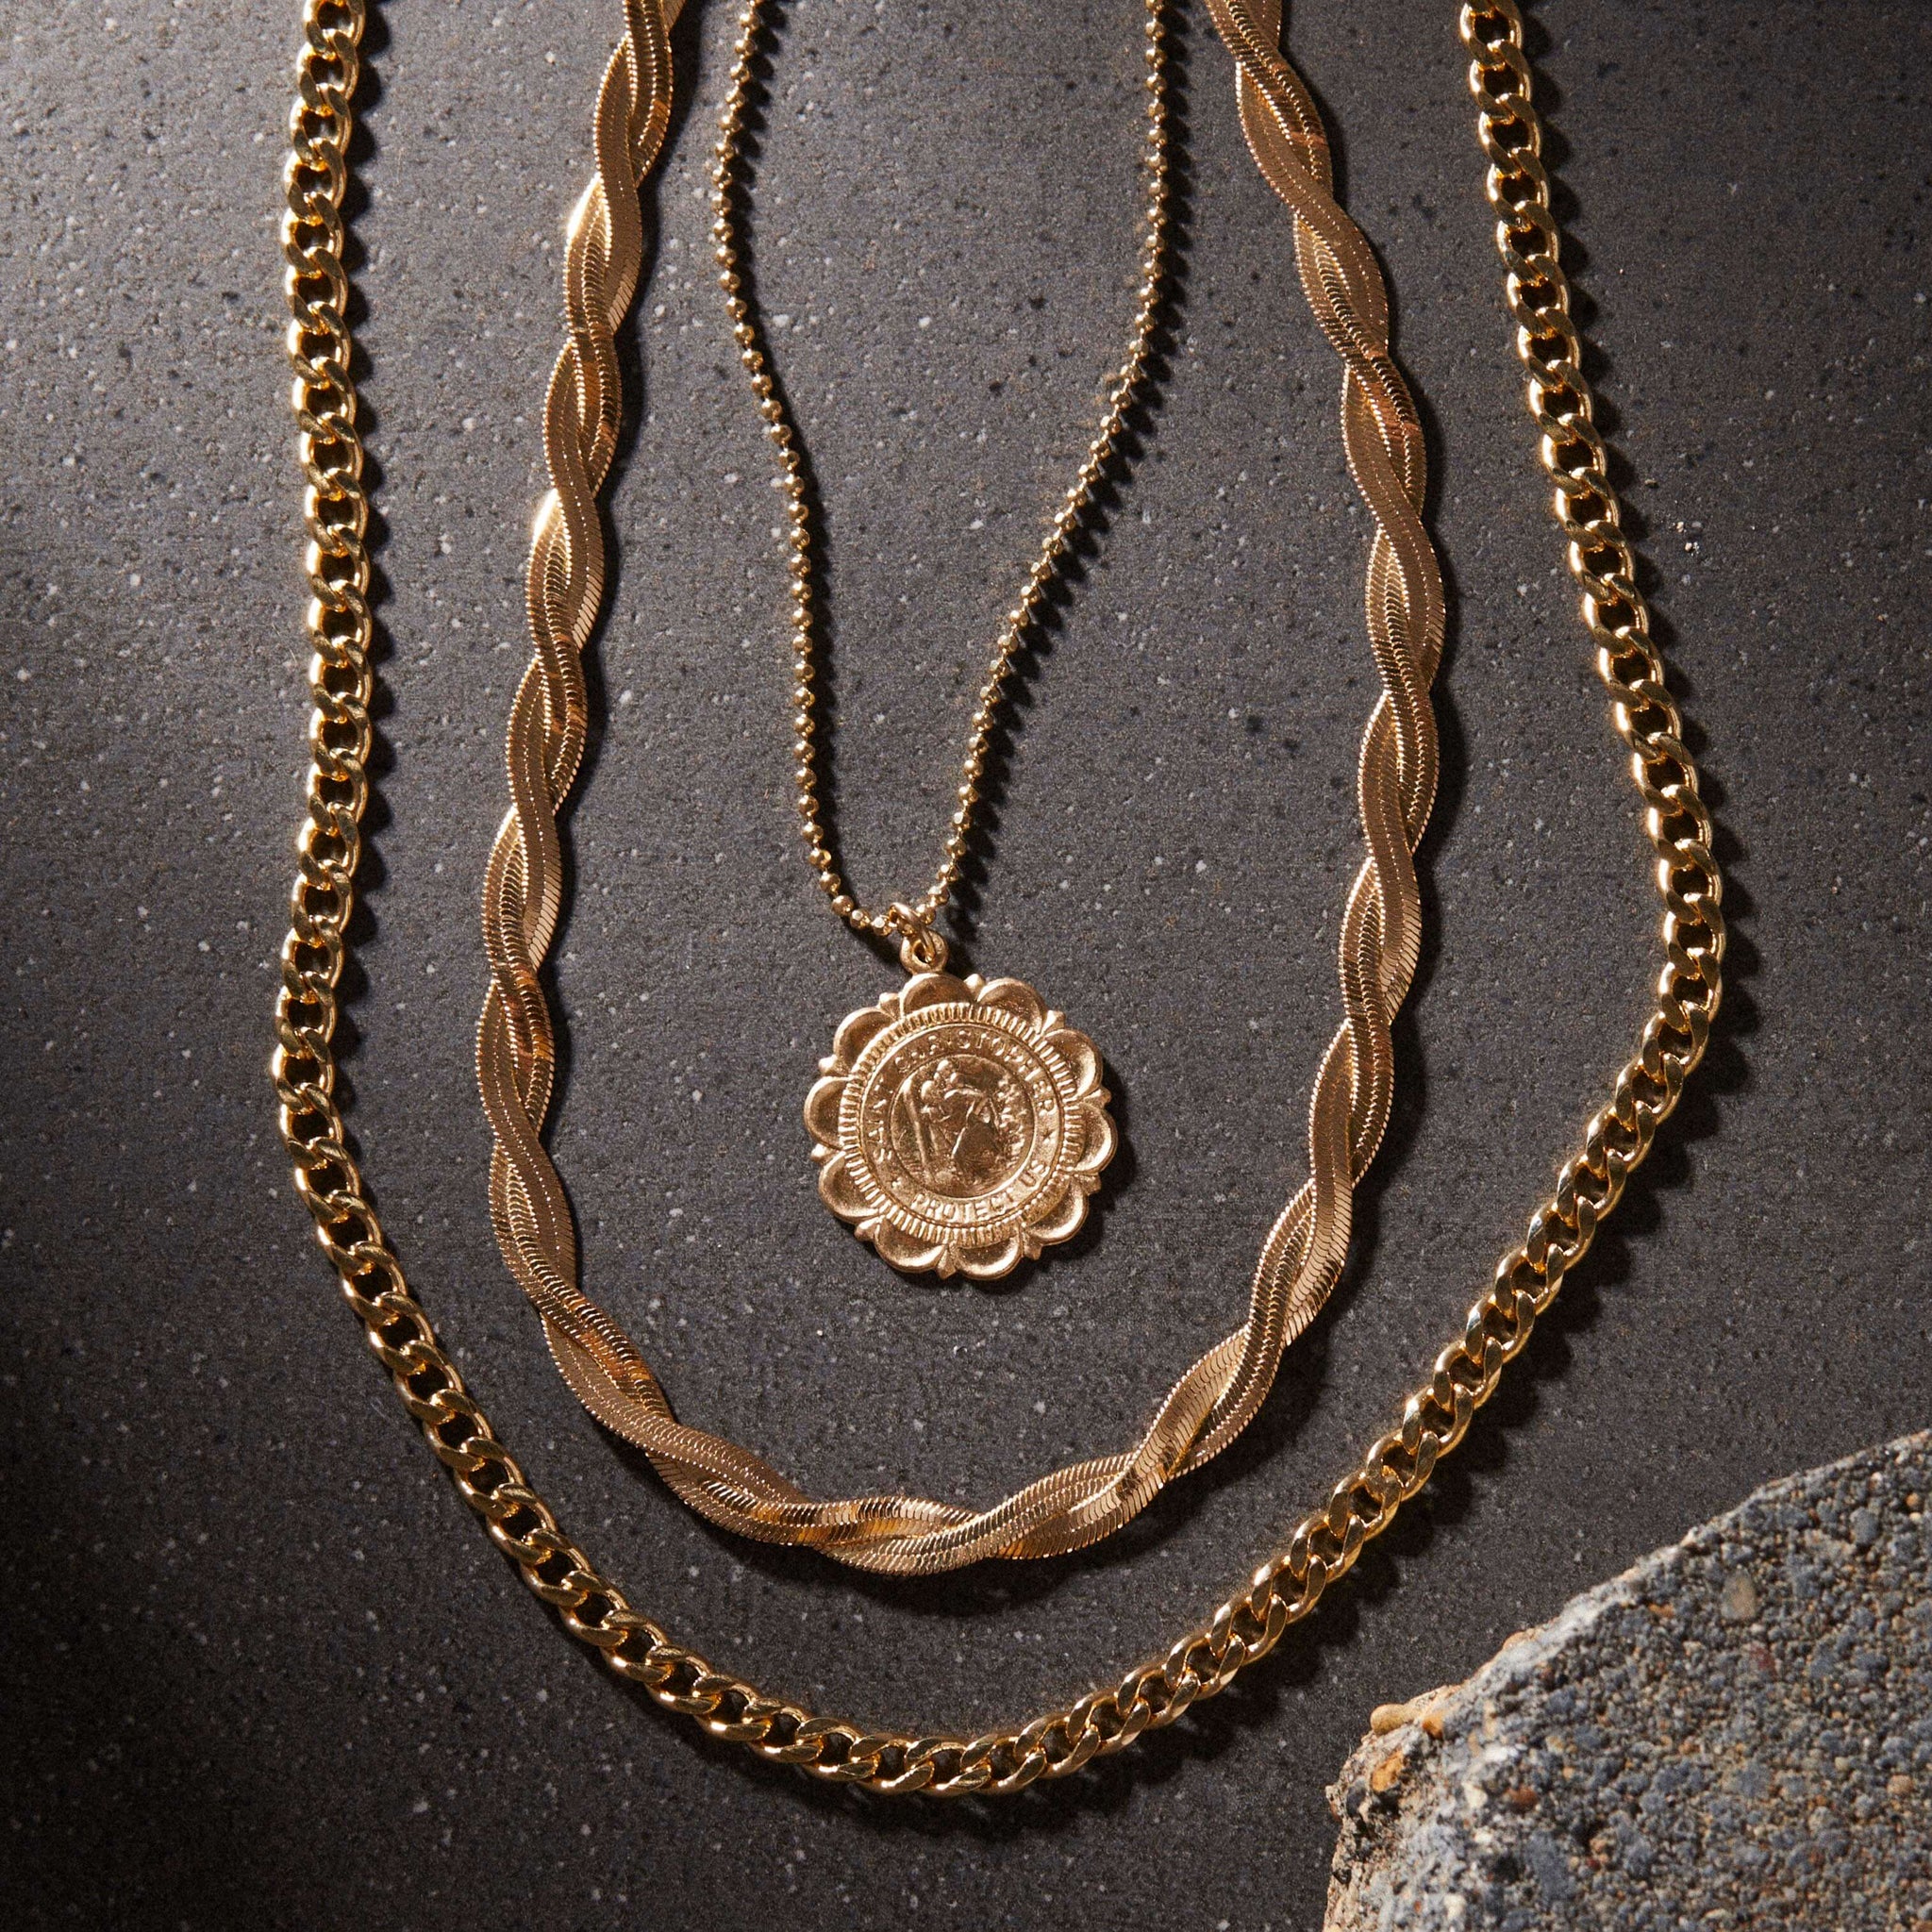 Curb Chain Necklace - Gold